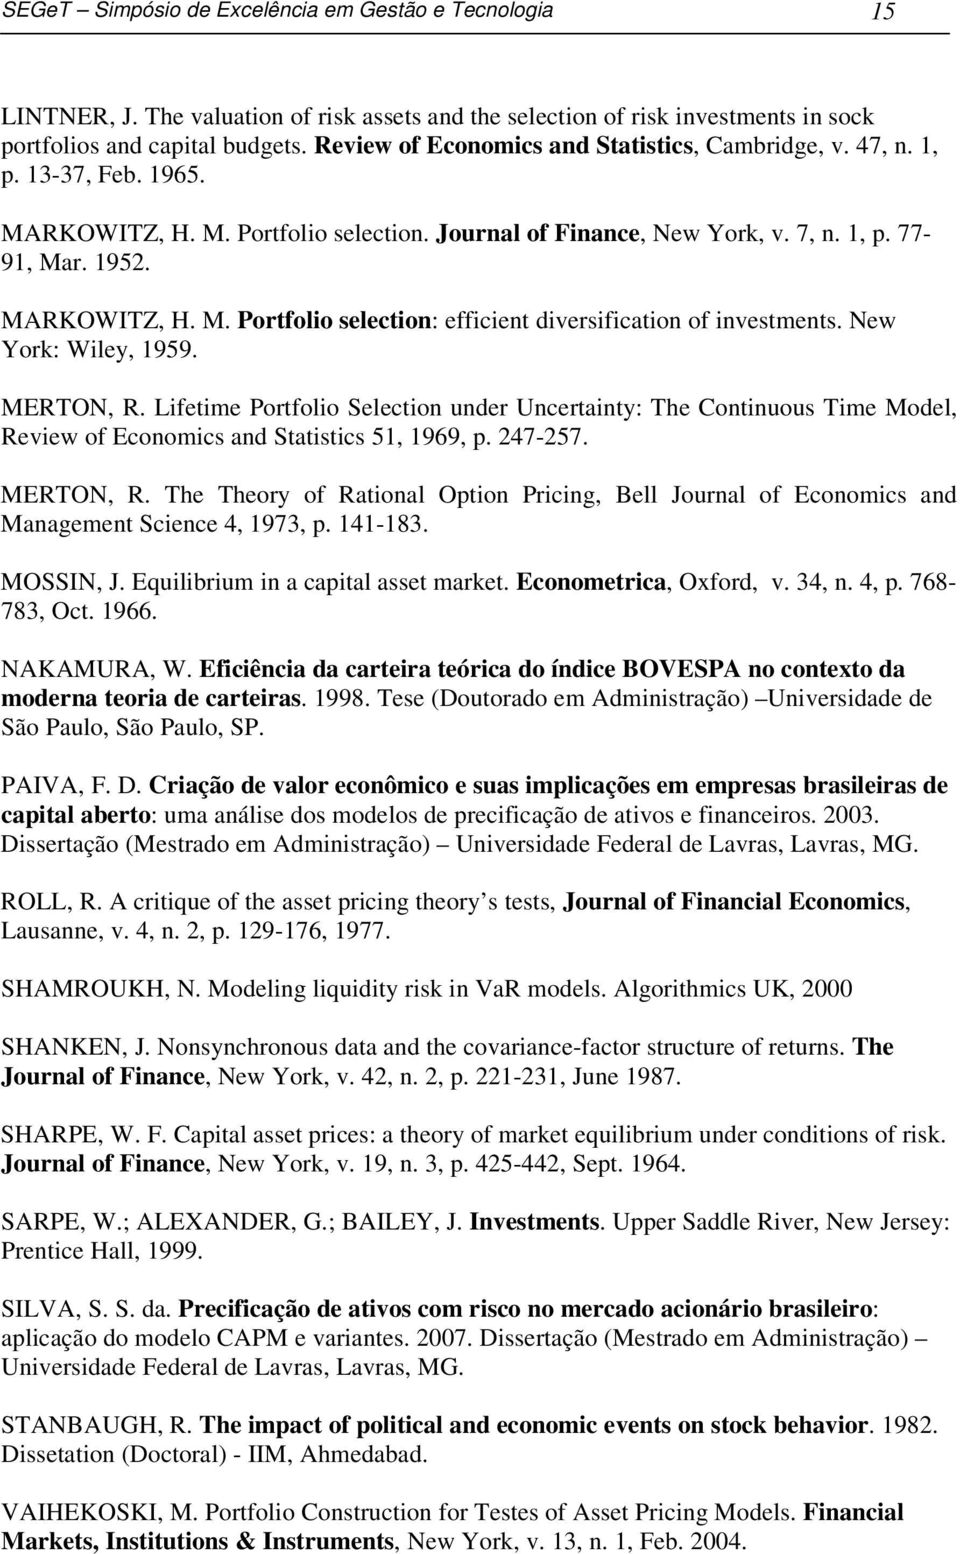 New York: Wiley, 1959. ETON,. Lifetime ortfolio Selection under Uncertainty: The Continuous Time odel, eview of Economics and Statistics 51, 1969, p. 247-257. ETON,. The Theory of ational Oion ricing, Bell Journal of Economics and anagement Science 4, 1973, p.